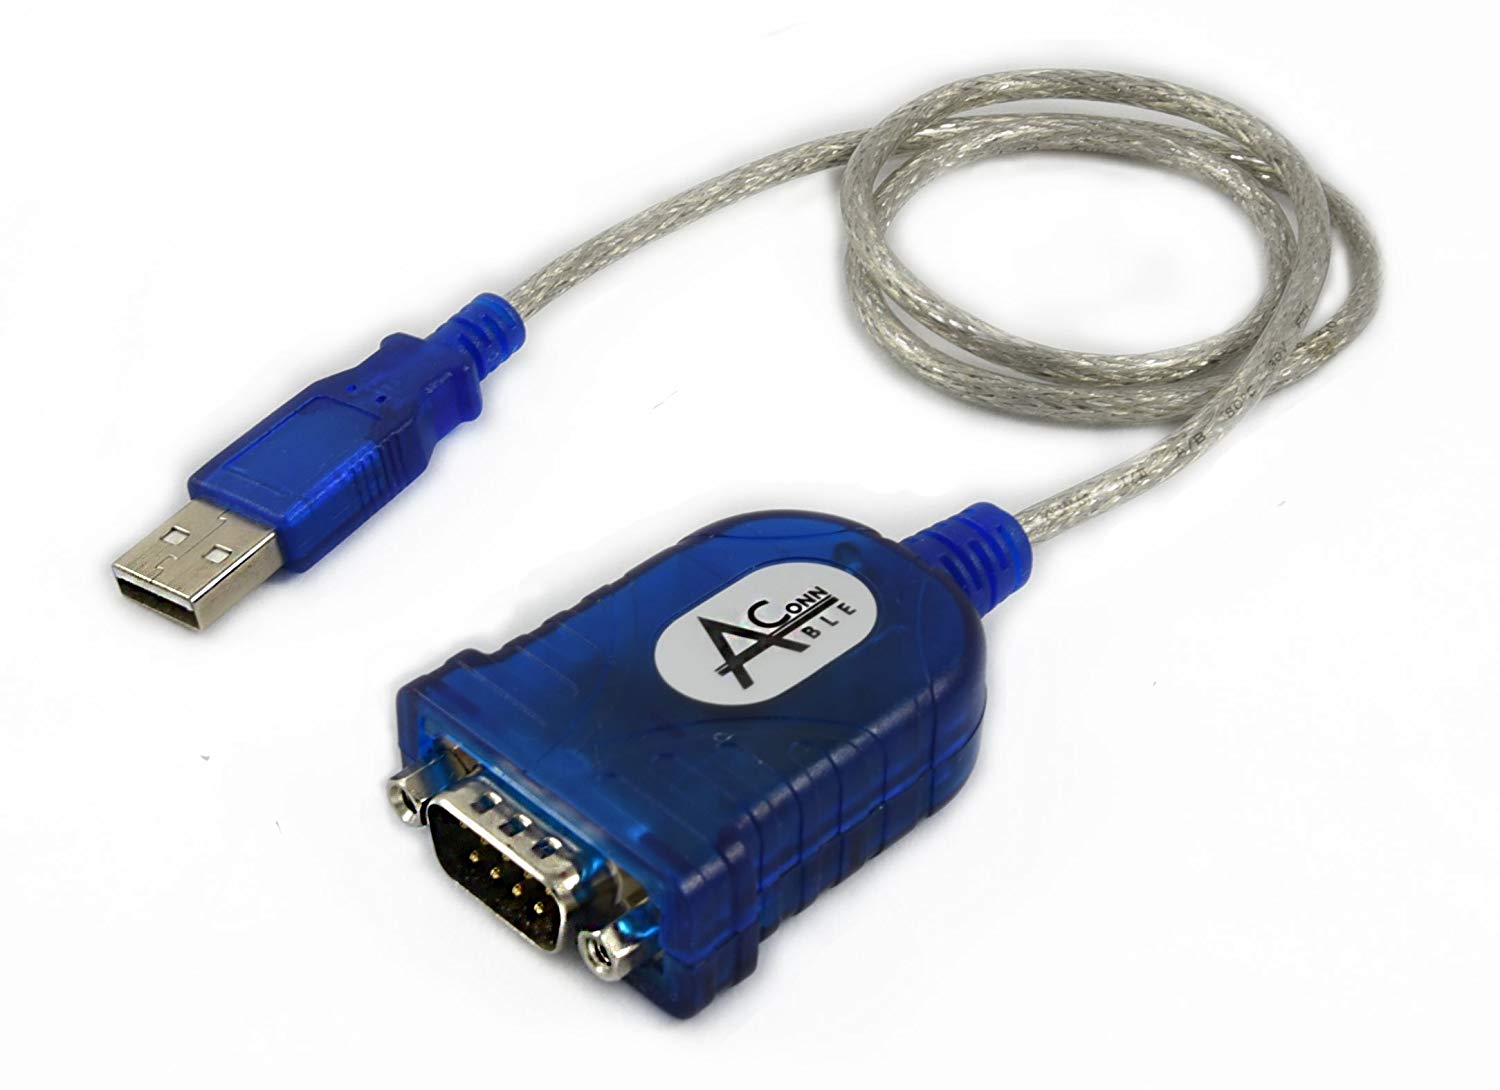 Gigaware usb serial cable driver free download